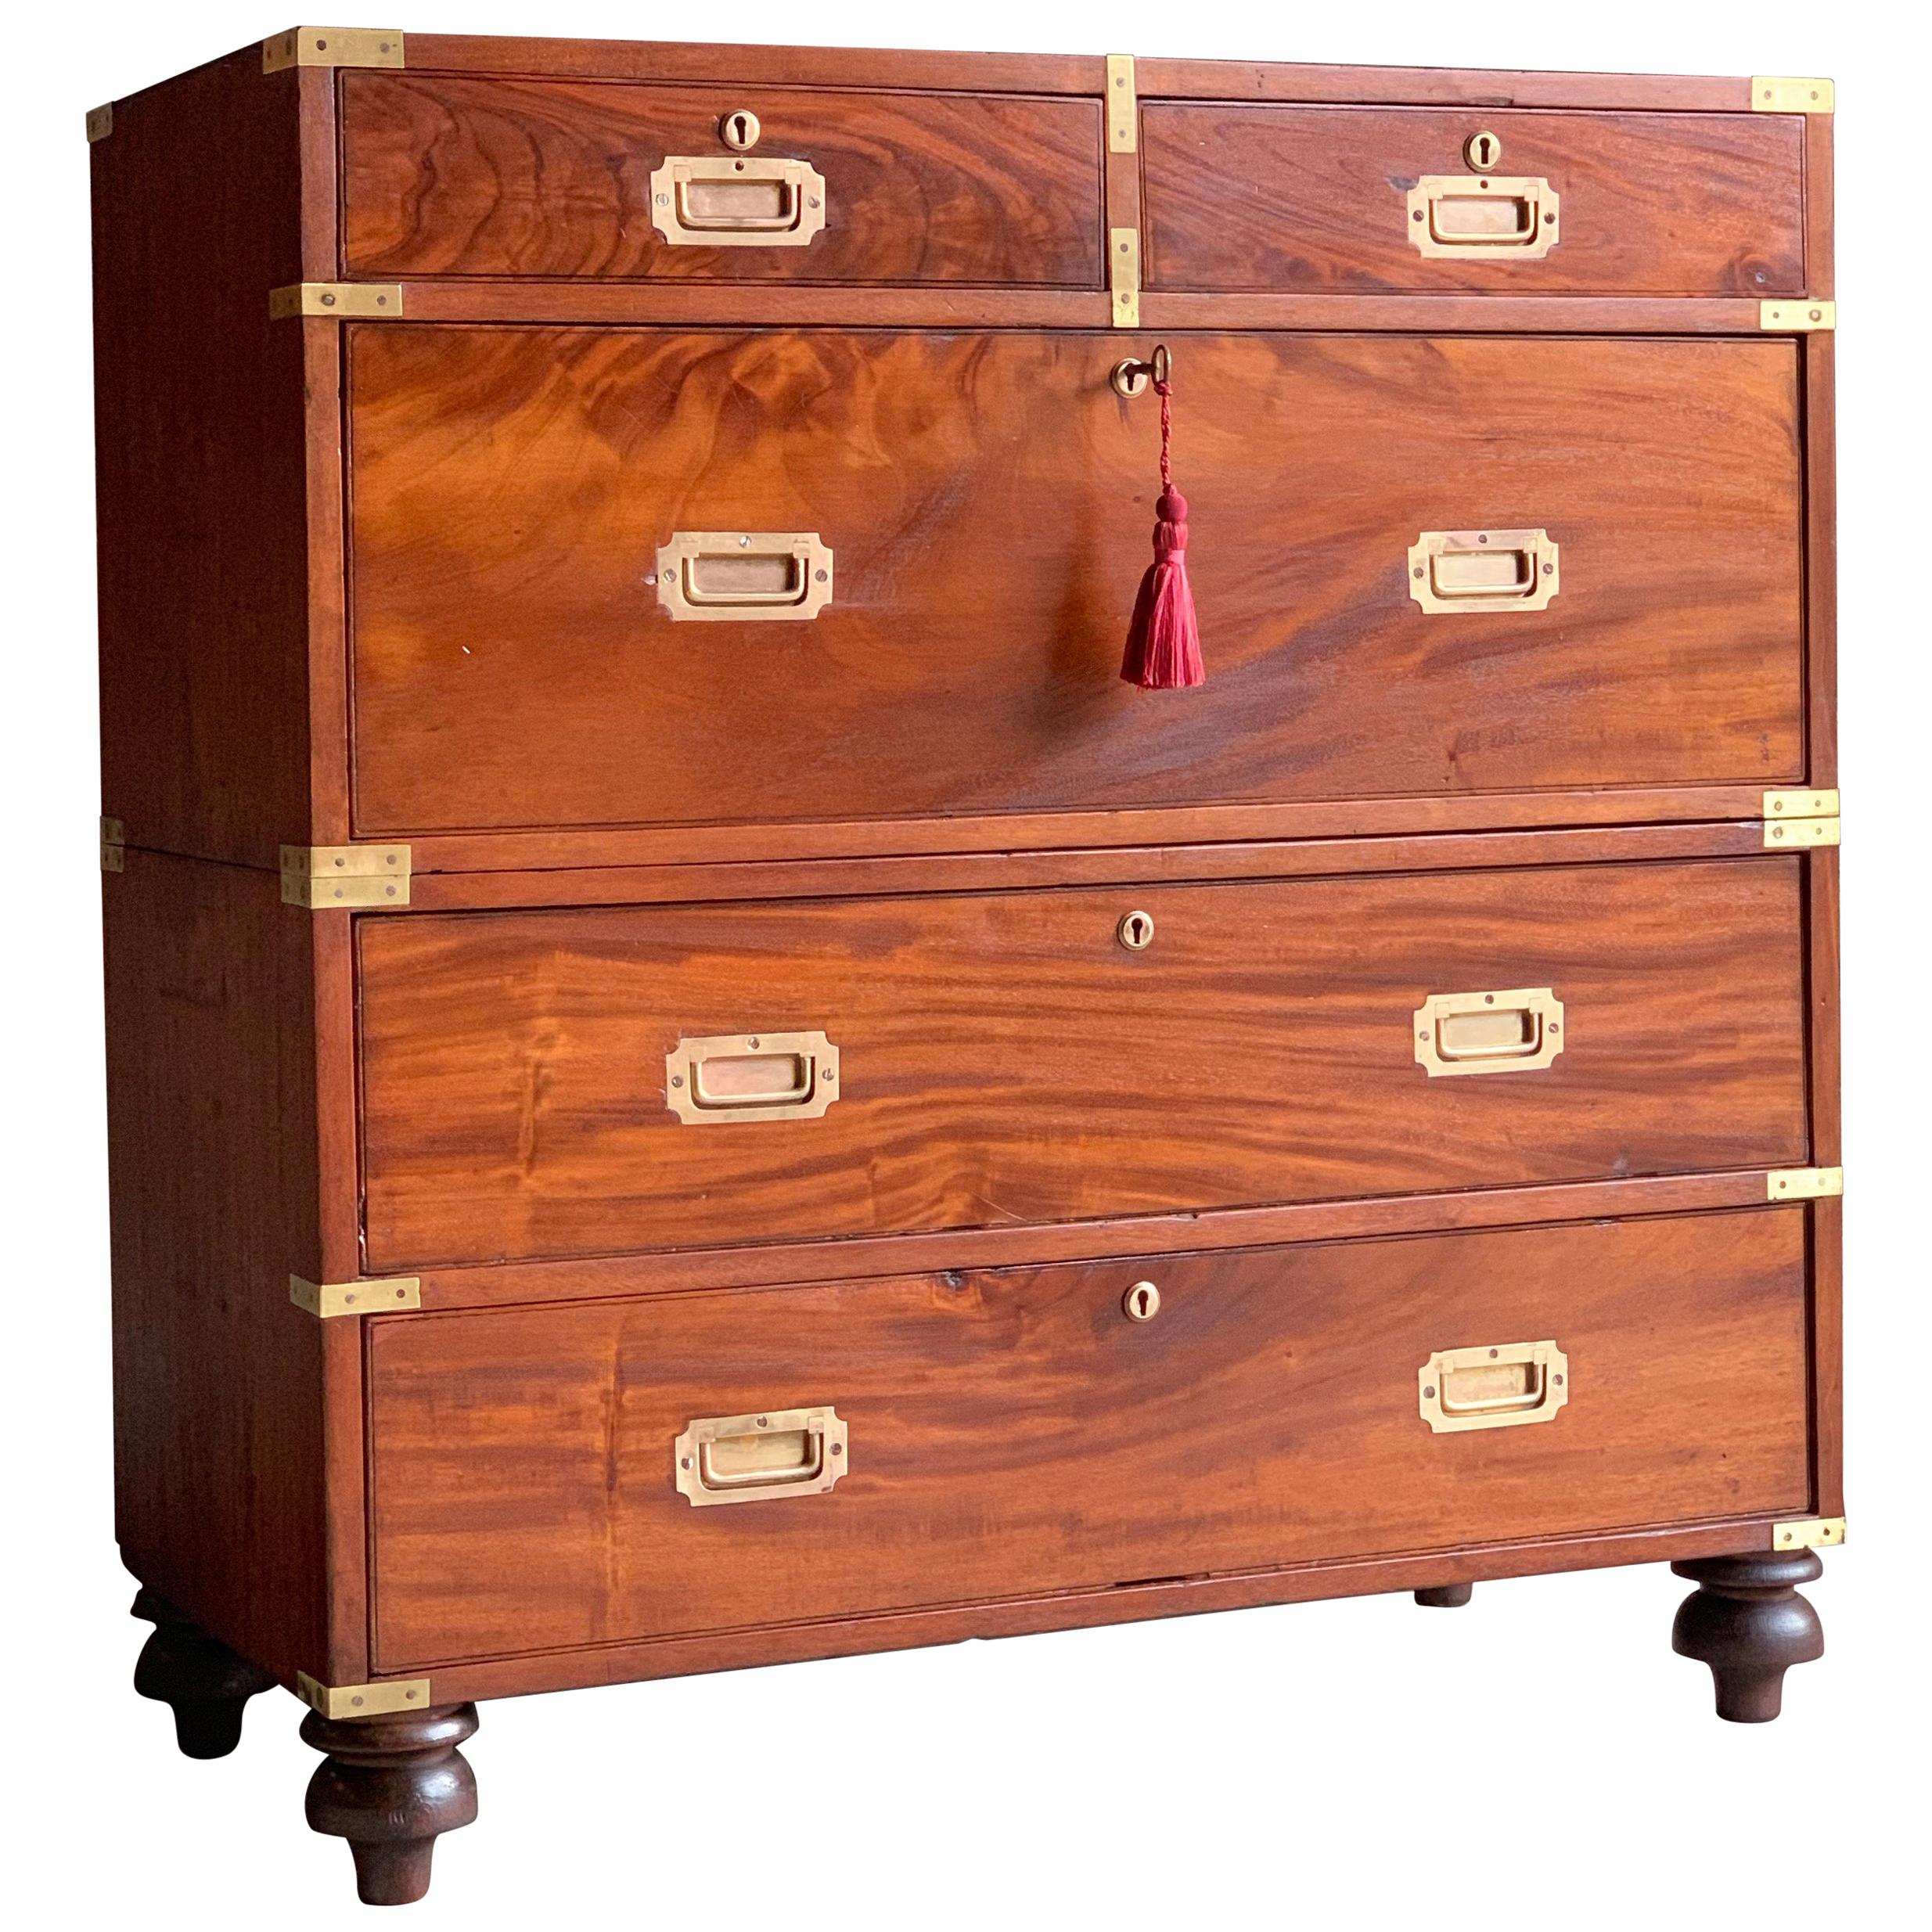 Antique Campaign Chest of Drawers Mahogany Military Victorian No.12, circa 1850